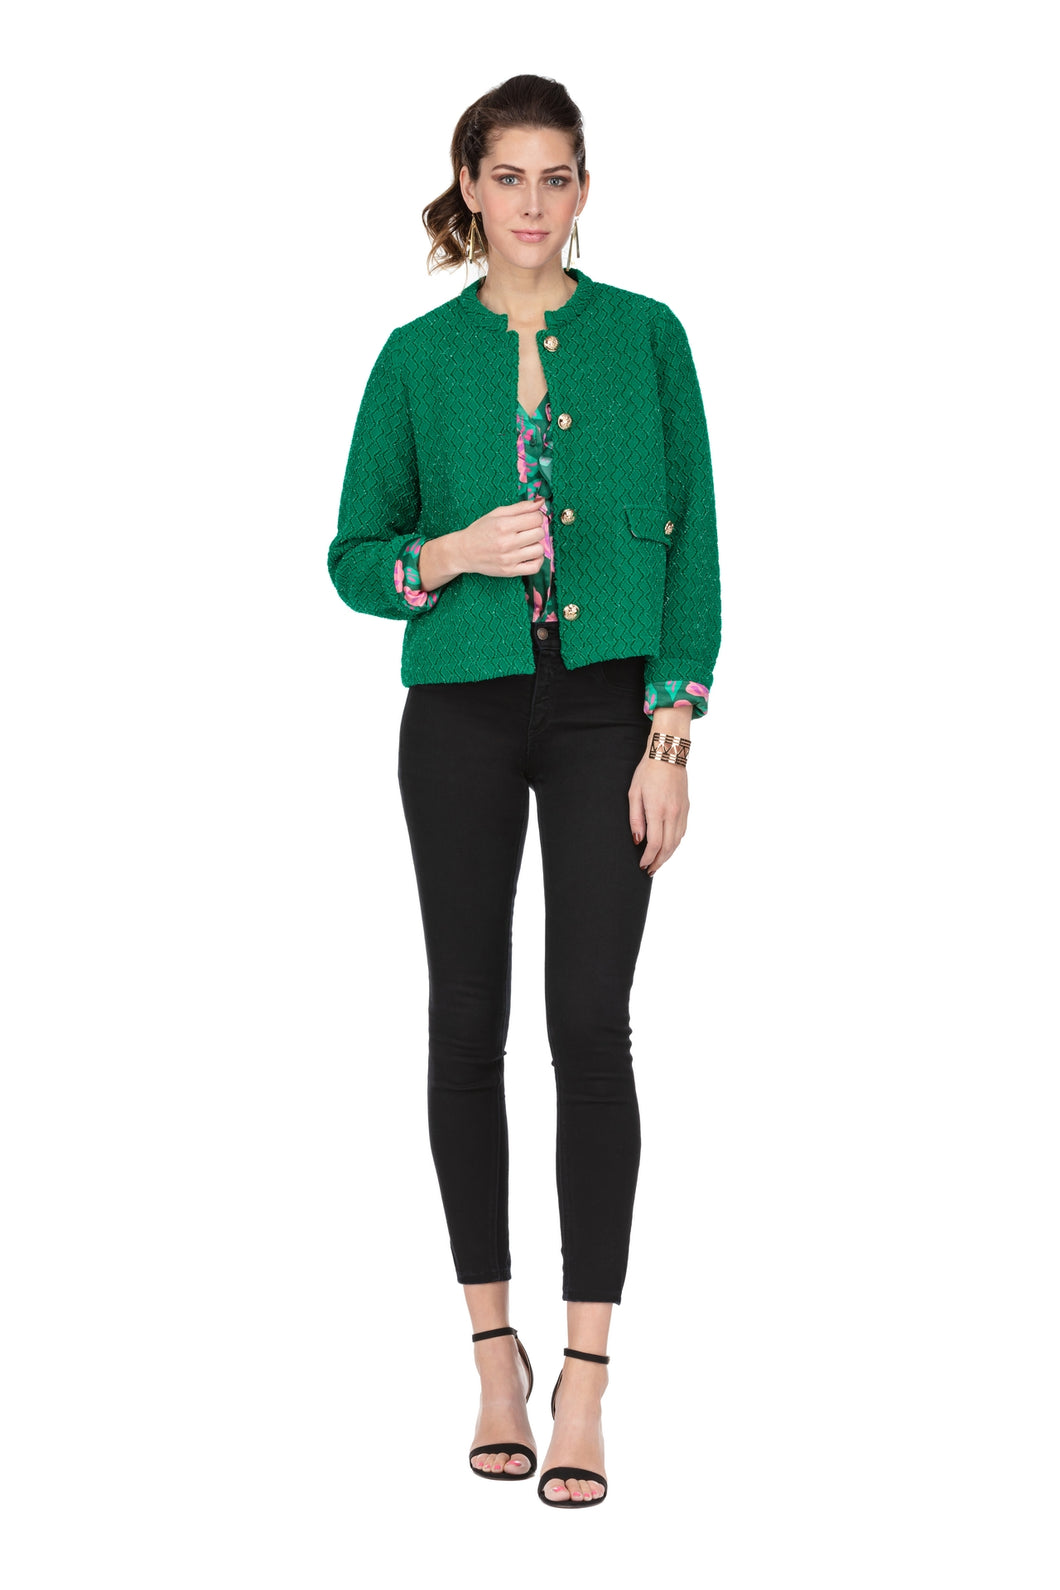 Incredibly chic and stunning, this jacket, very reminiscent of 50's glamour, has been modernized to include sparkle and a gorgeous mix of brilliant colors.  These fabulous jackets come in your choice of emerald green or hot pink and include metallic threading that dazzles with sparkle.  Buttons in a gold, shine boldly while the inner lining is a bold floral pattern in pink and green. Pictures just can't do this jacket justice!